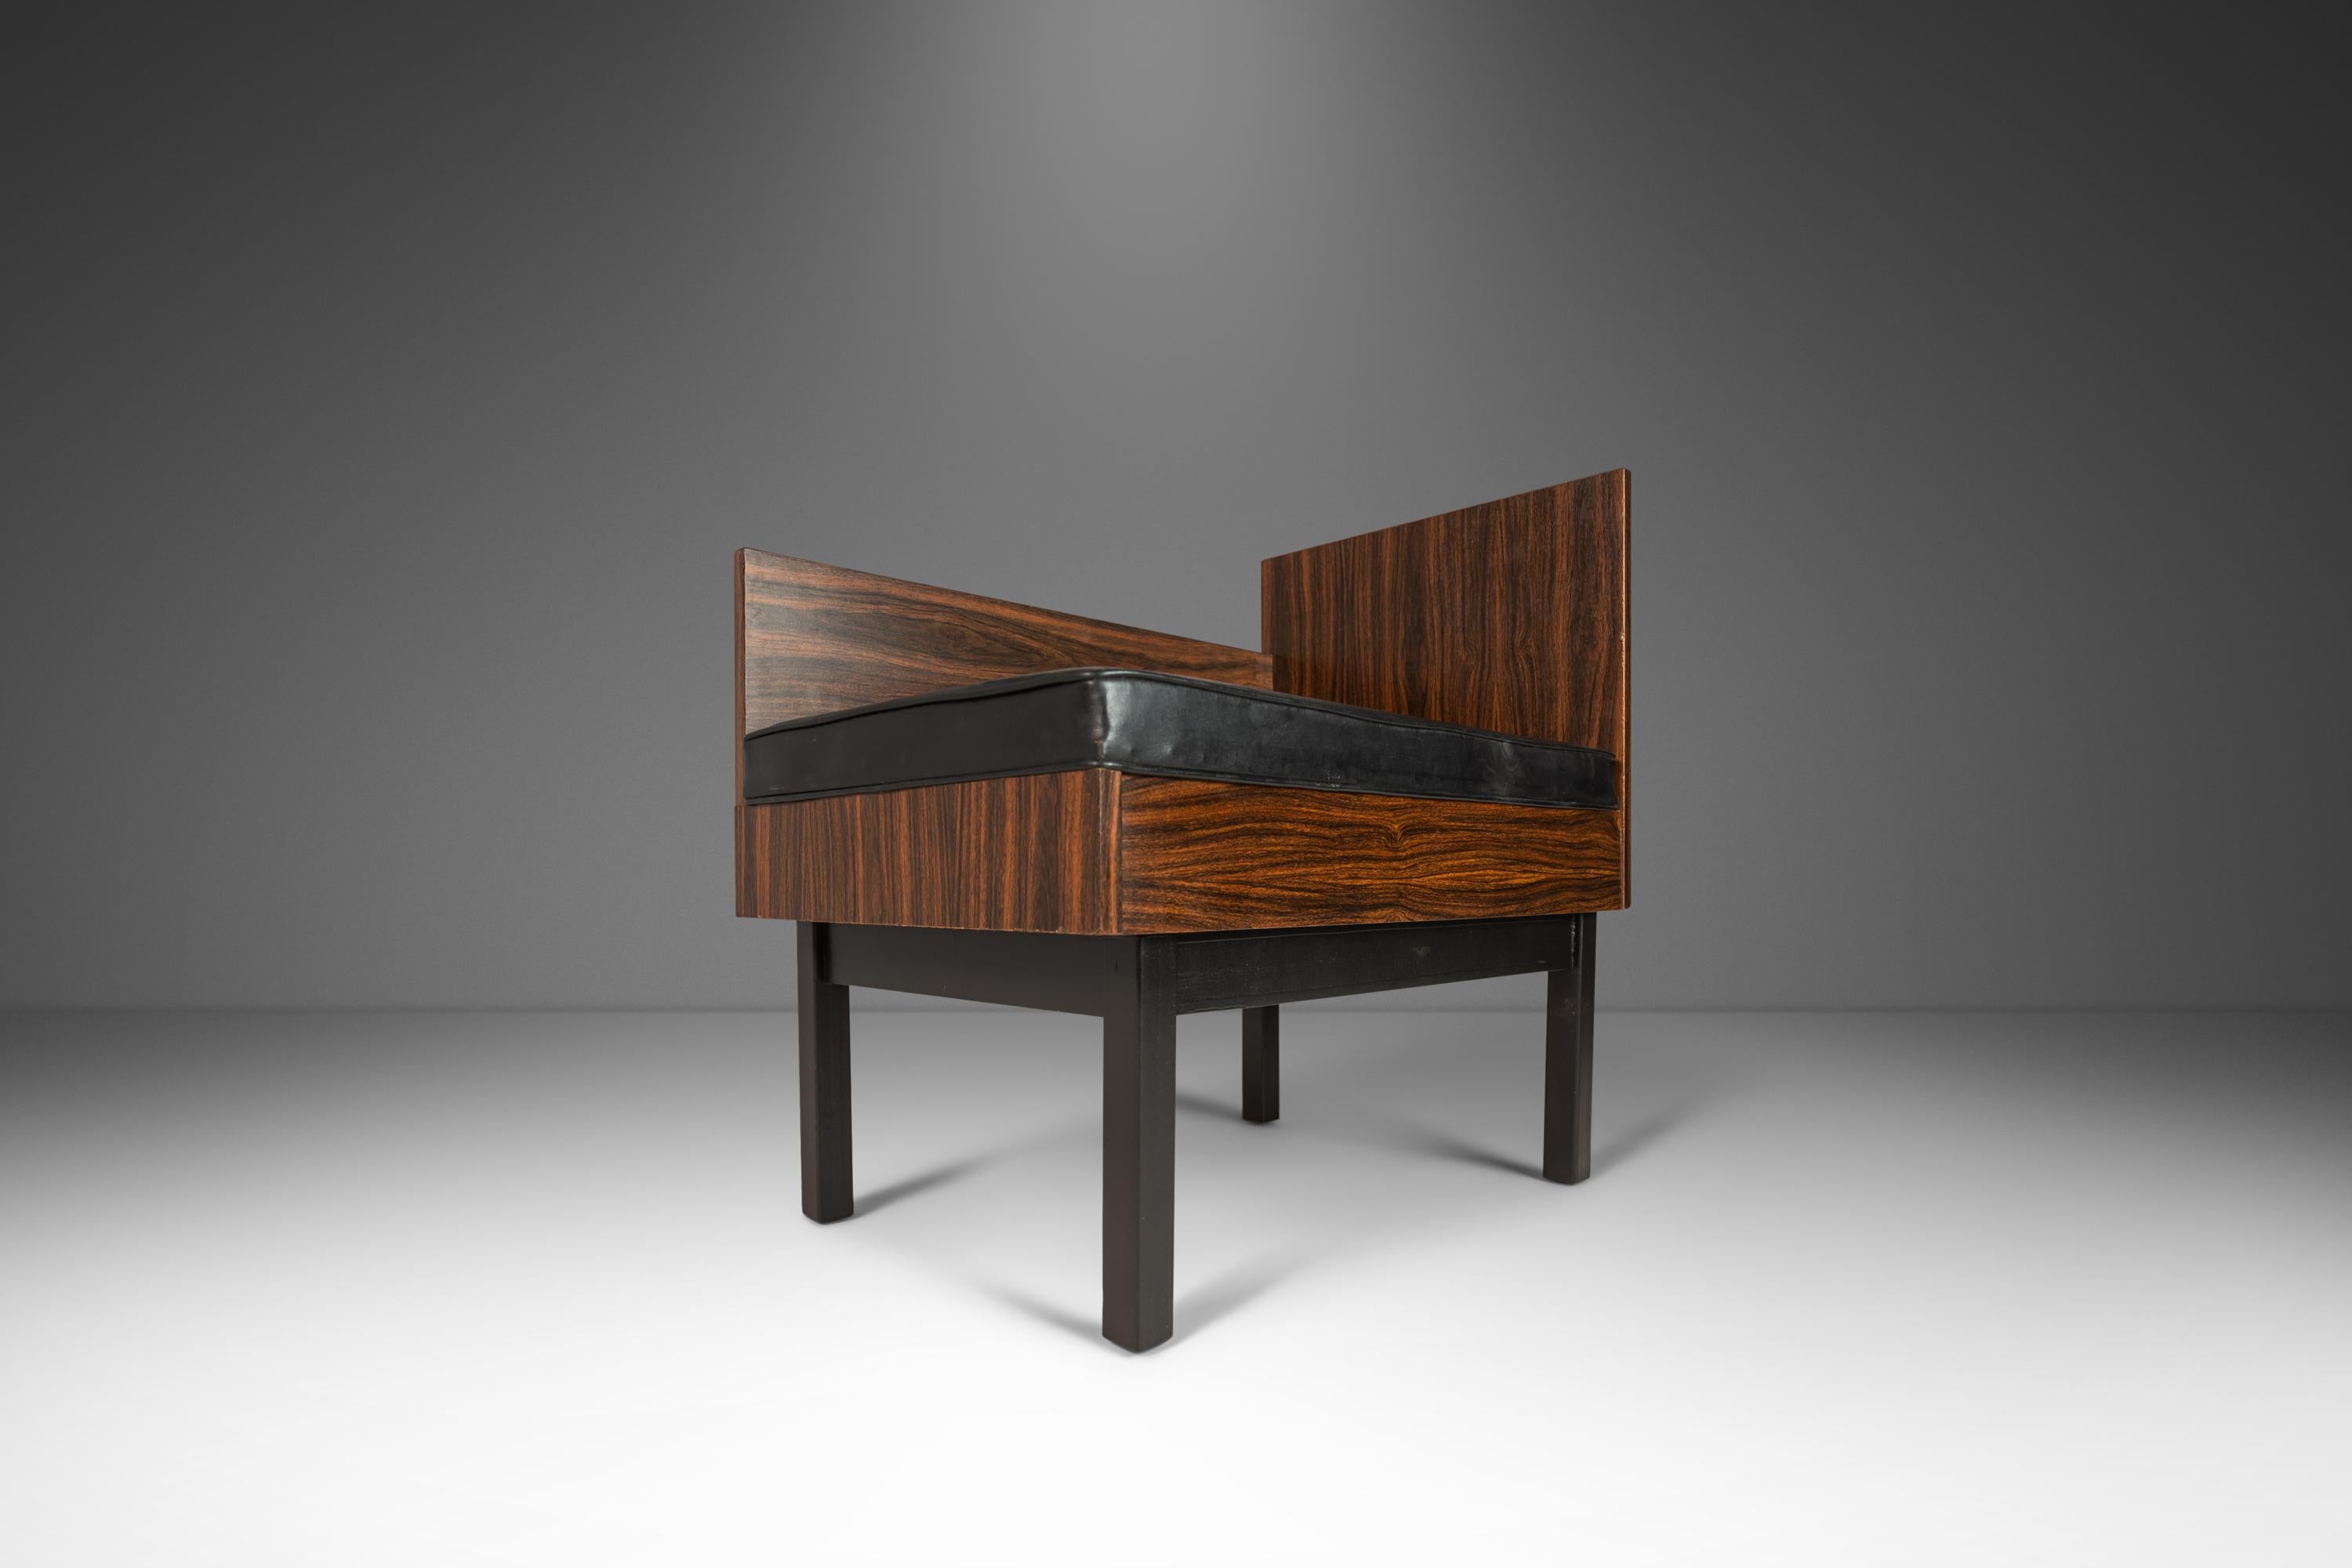 Set of Two ( 2 ) Modular Benches Kissing Benches in Rosewood Laminate, c. 1950's For Sale 1